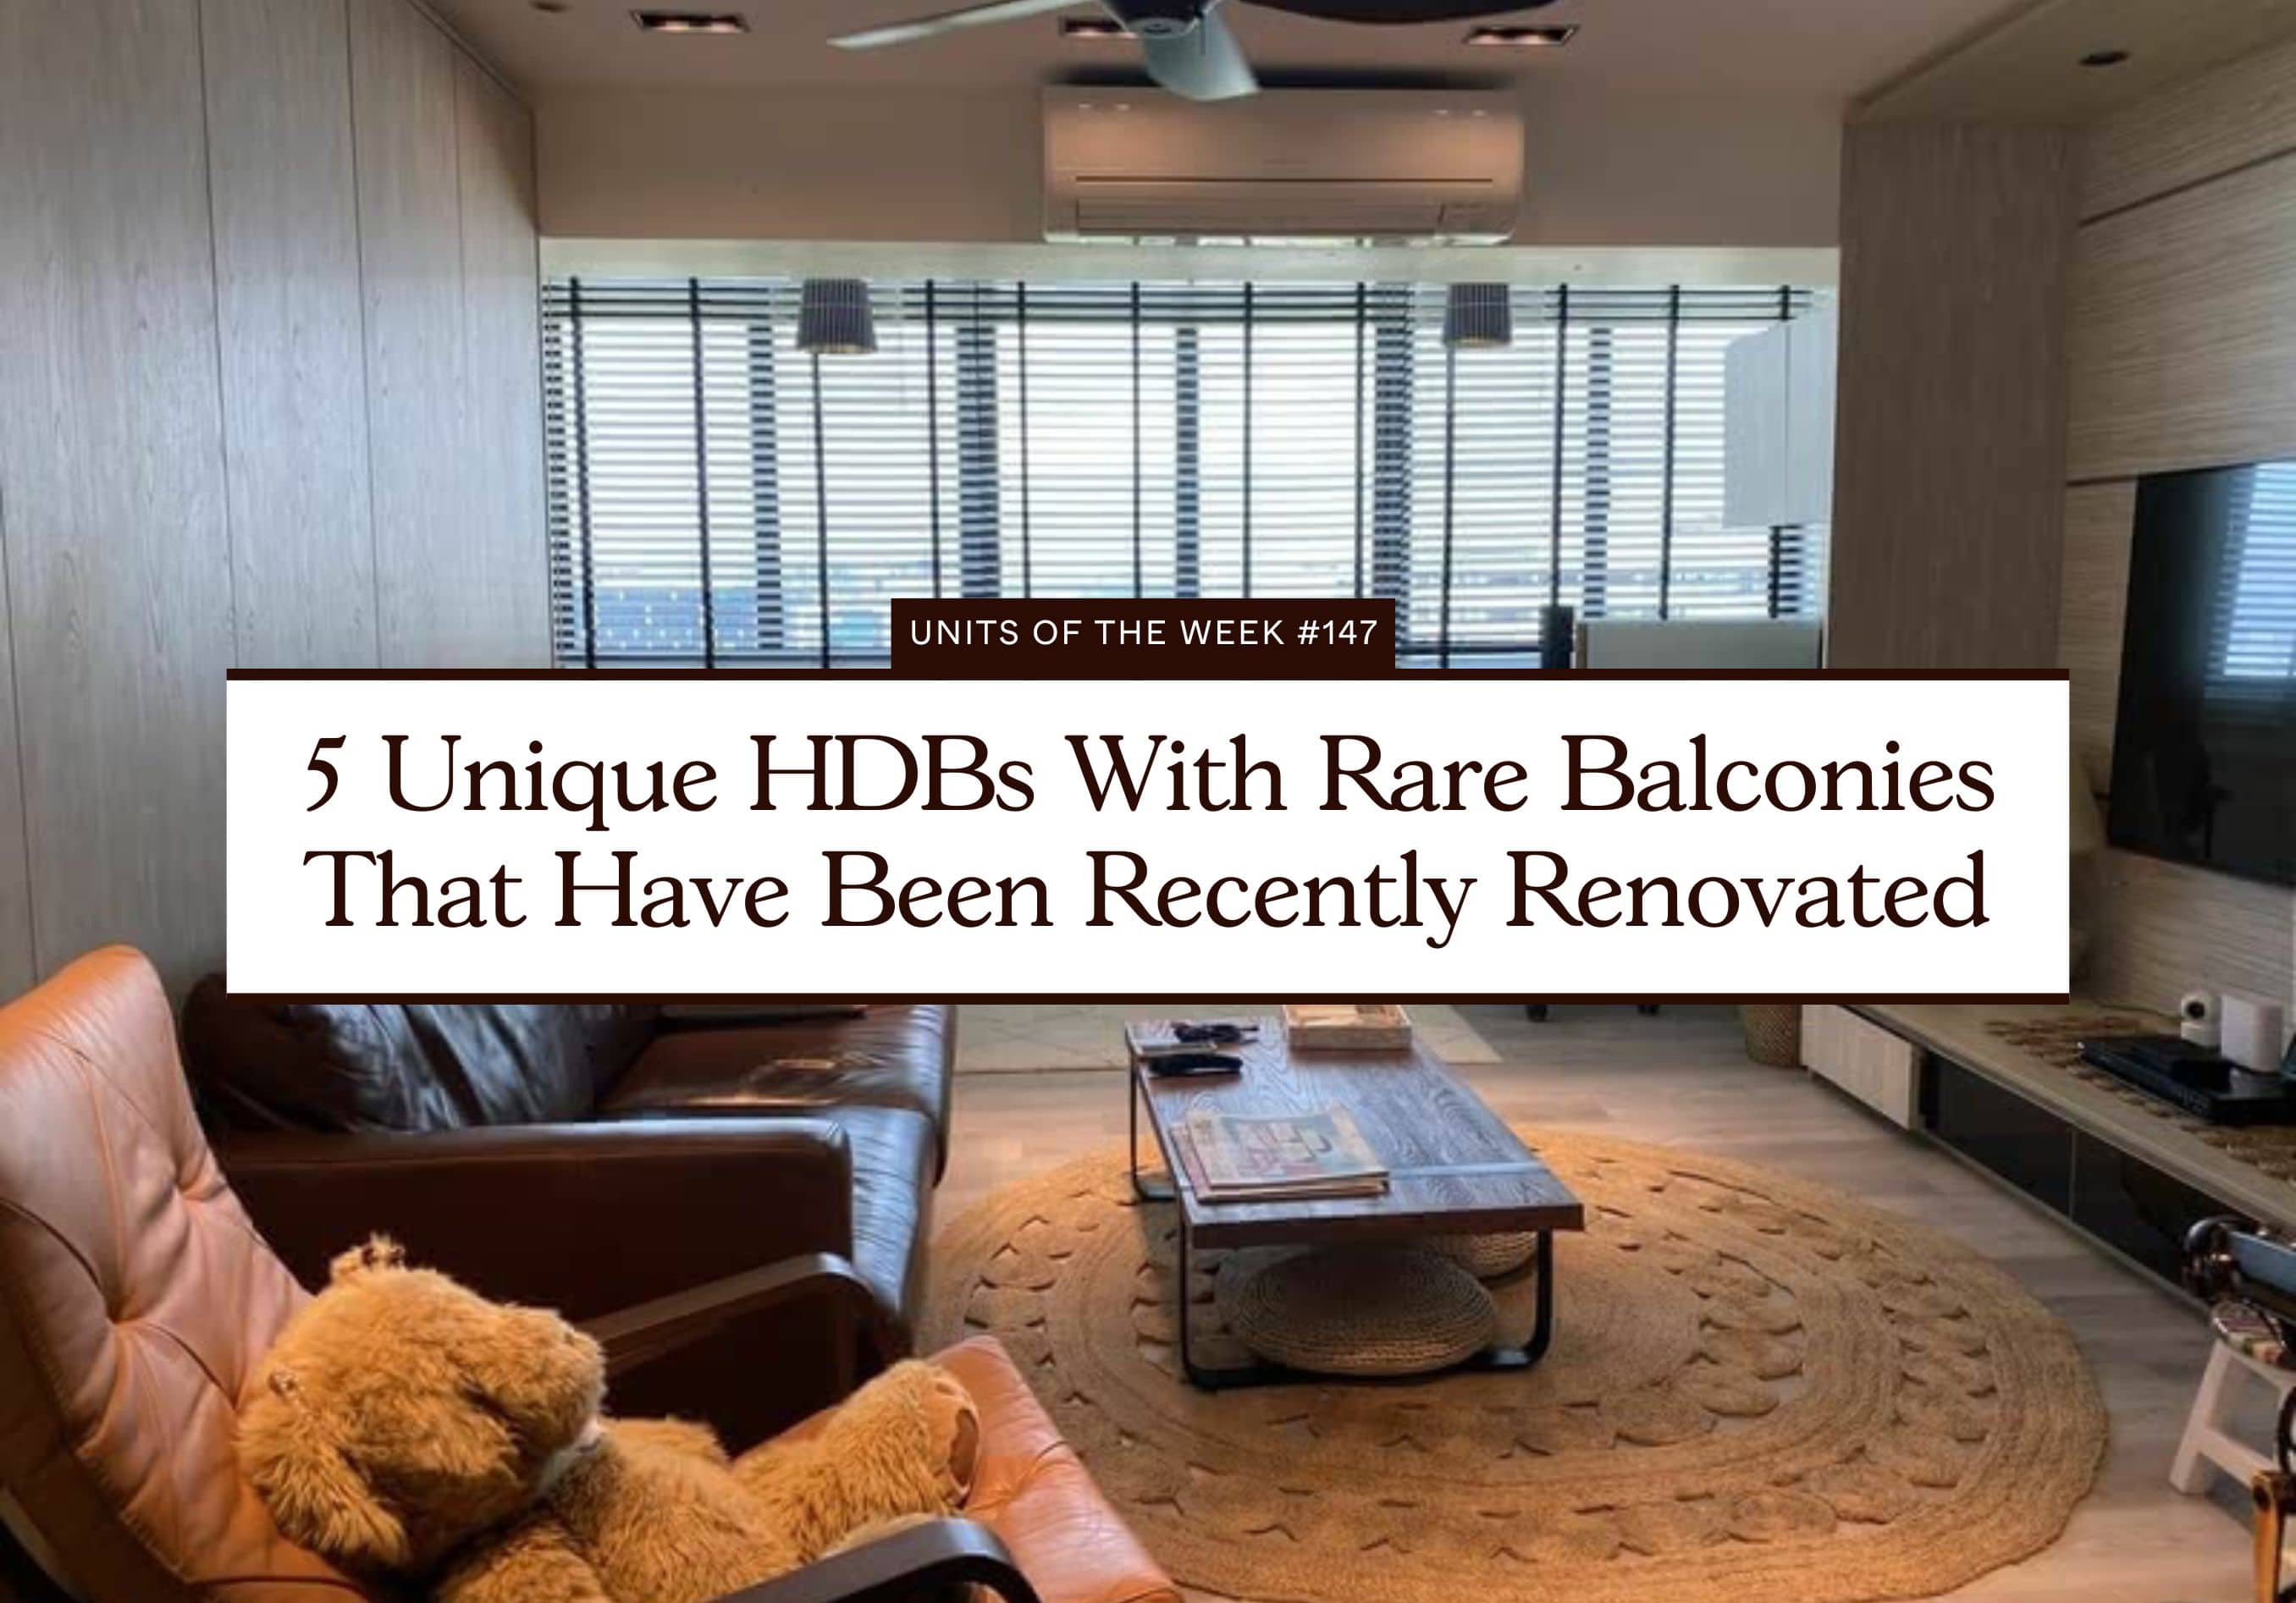 5 Unique HDBs With Rare Balconies That Have Been Recently Renovated